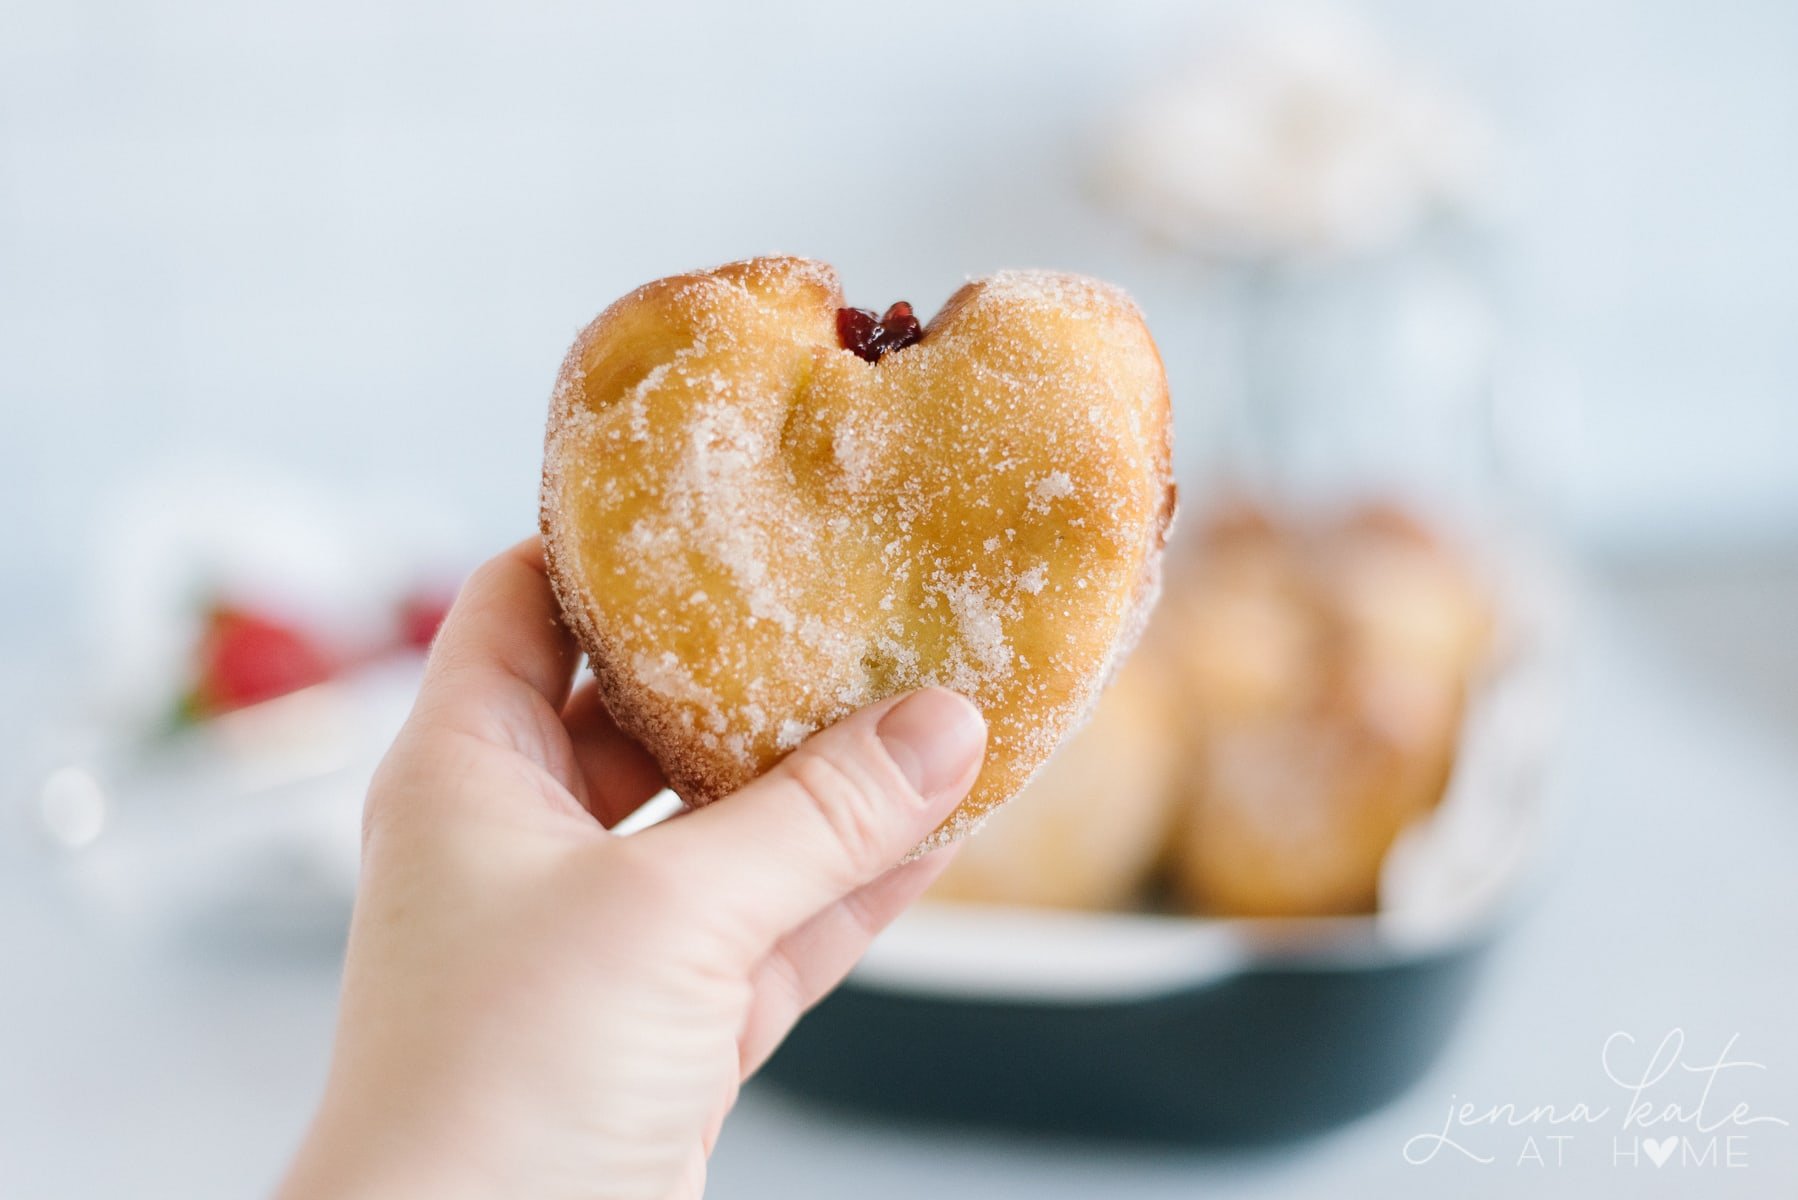 Hand holding up a heart shaped yeast donut